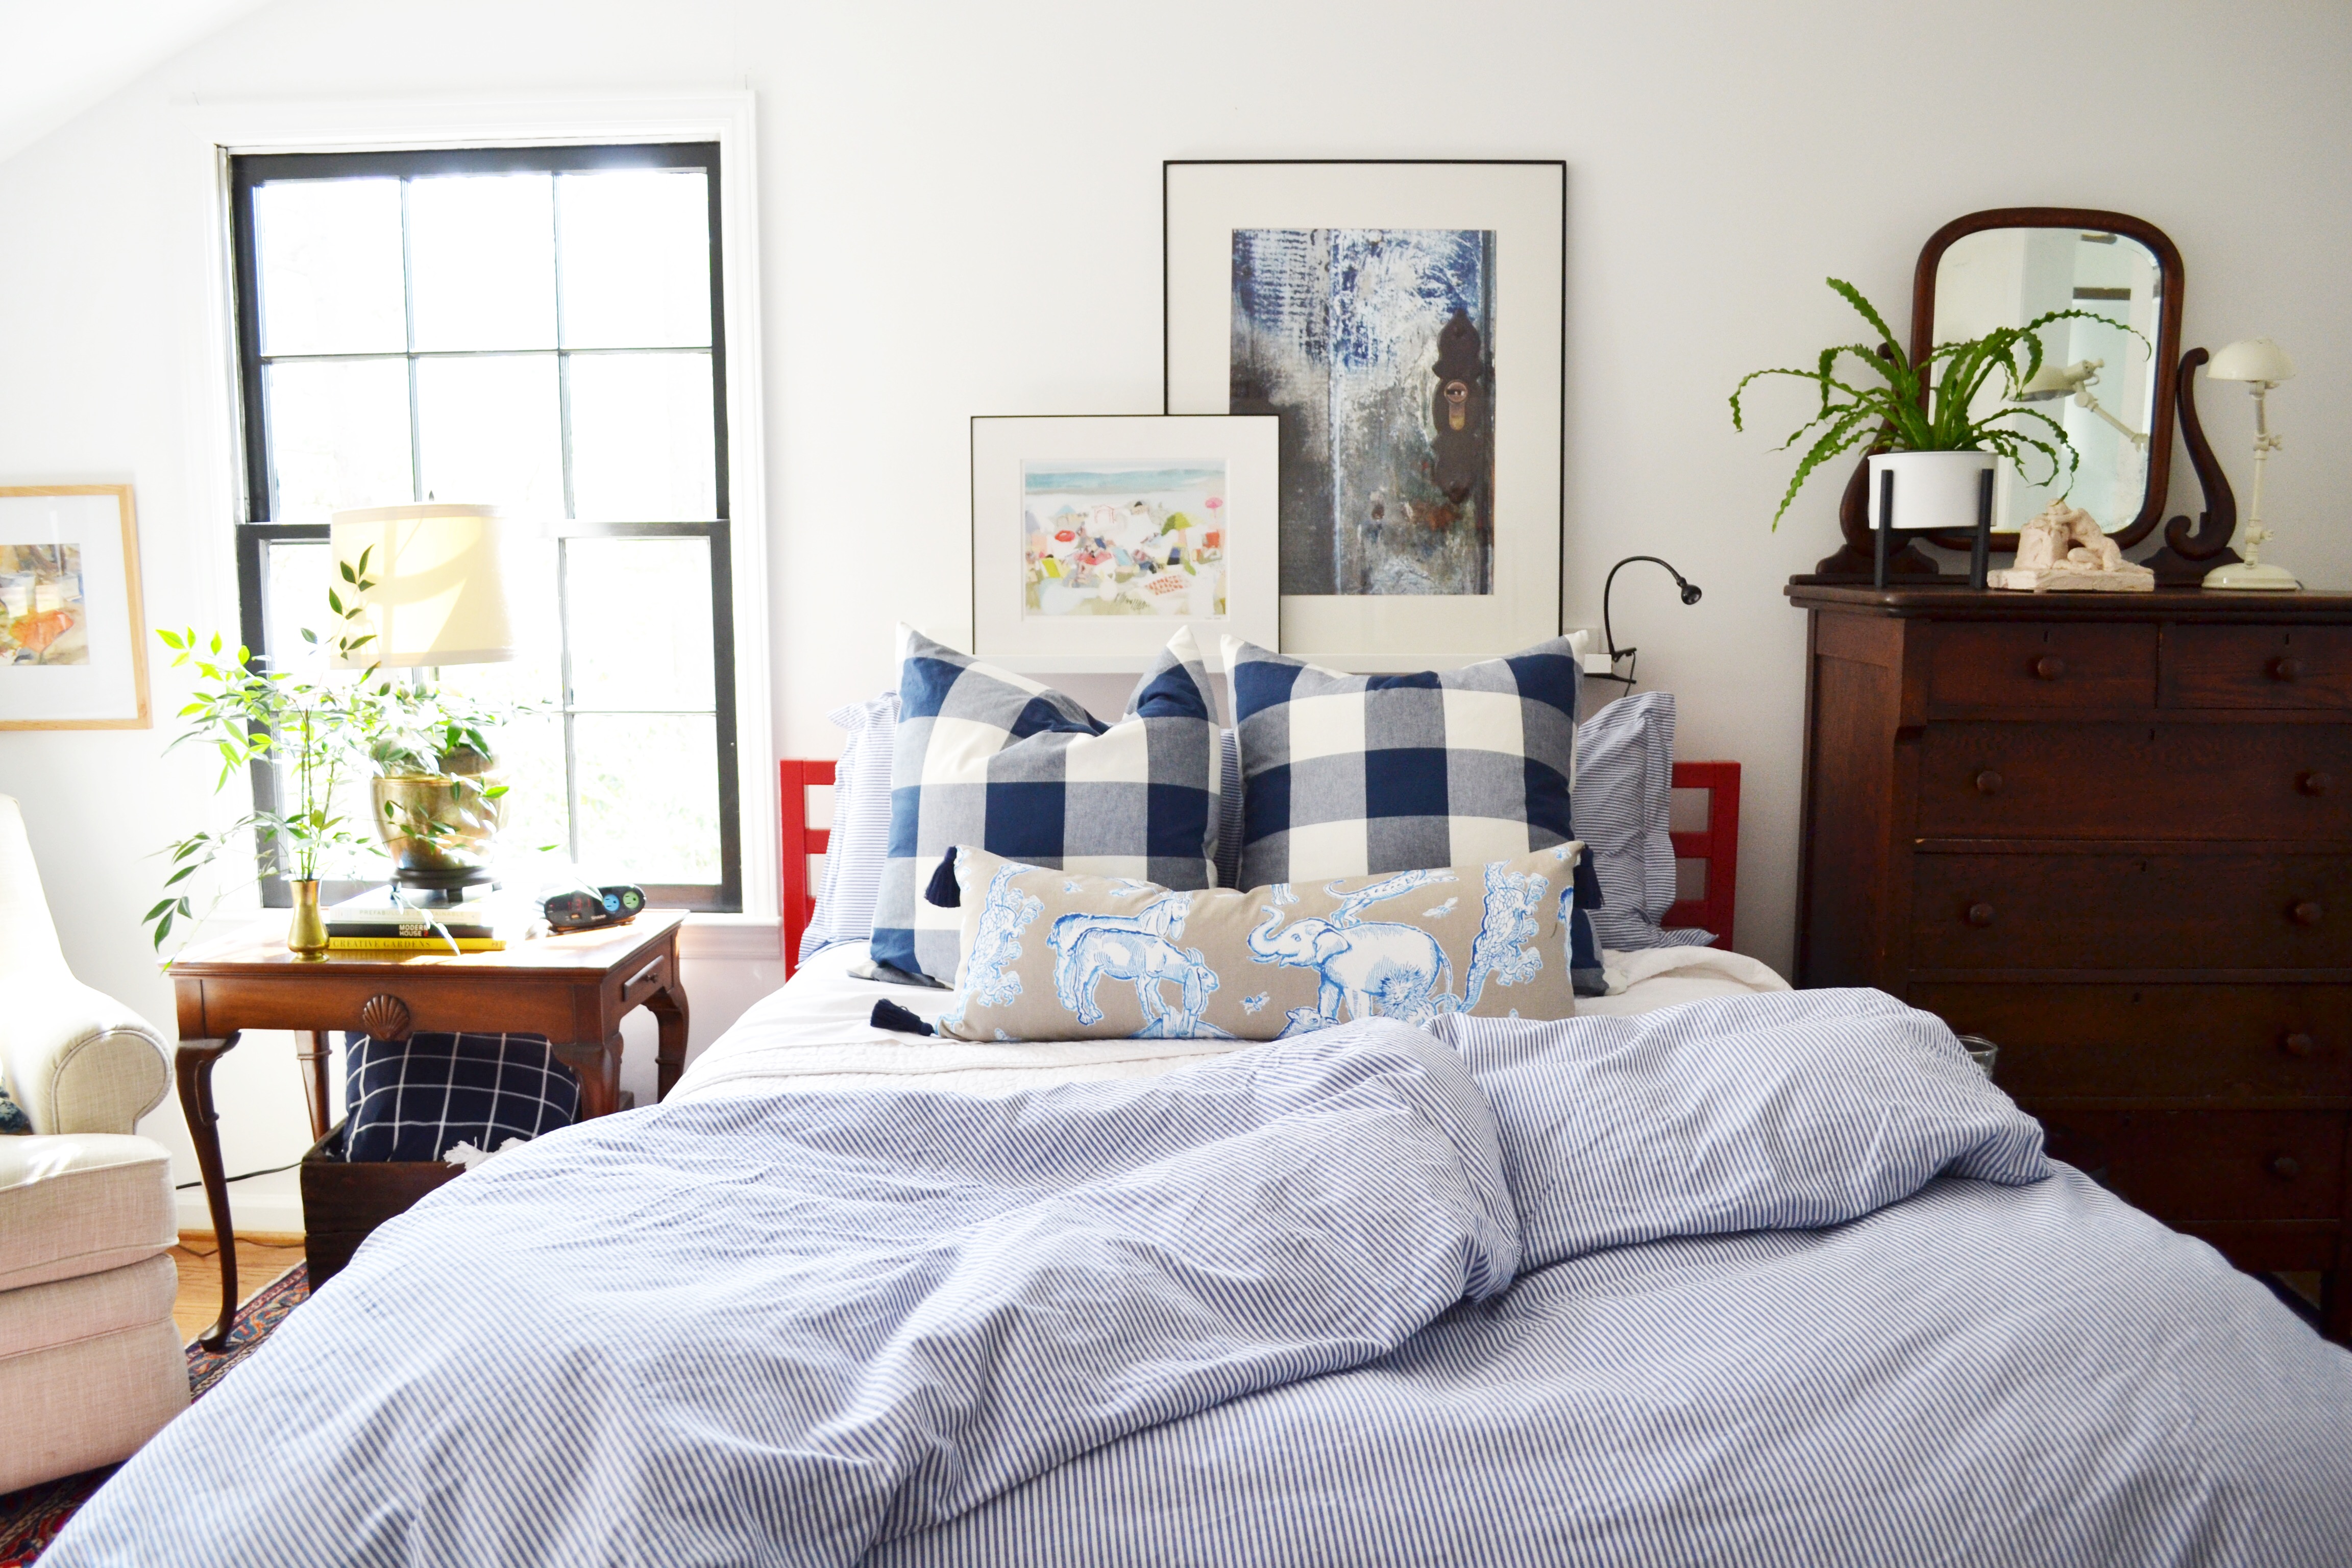 How to make an irresistably comfortable bed